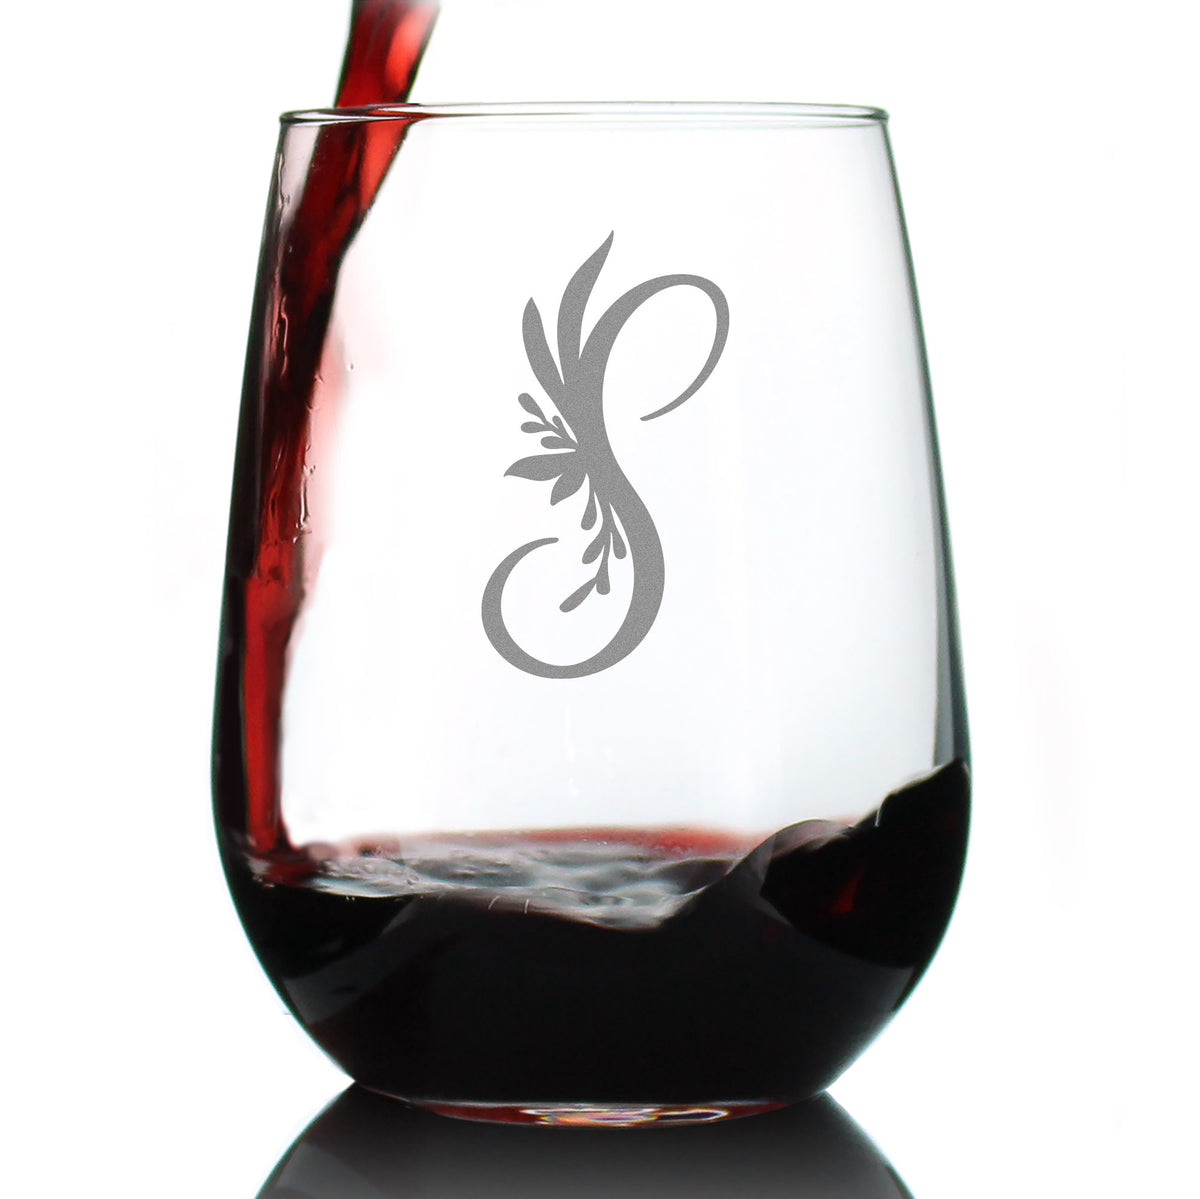 Monogram Floral Letter S - Stemless Wine Glass - Personalized Gifts for Women and Men - Large Engraved 17 Oz Glasses